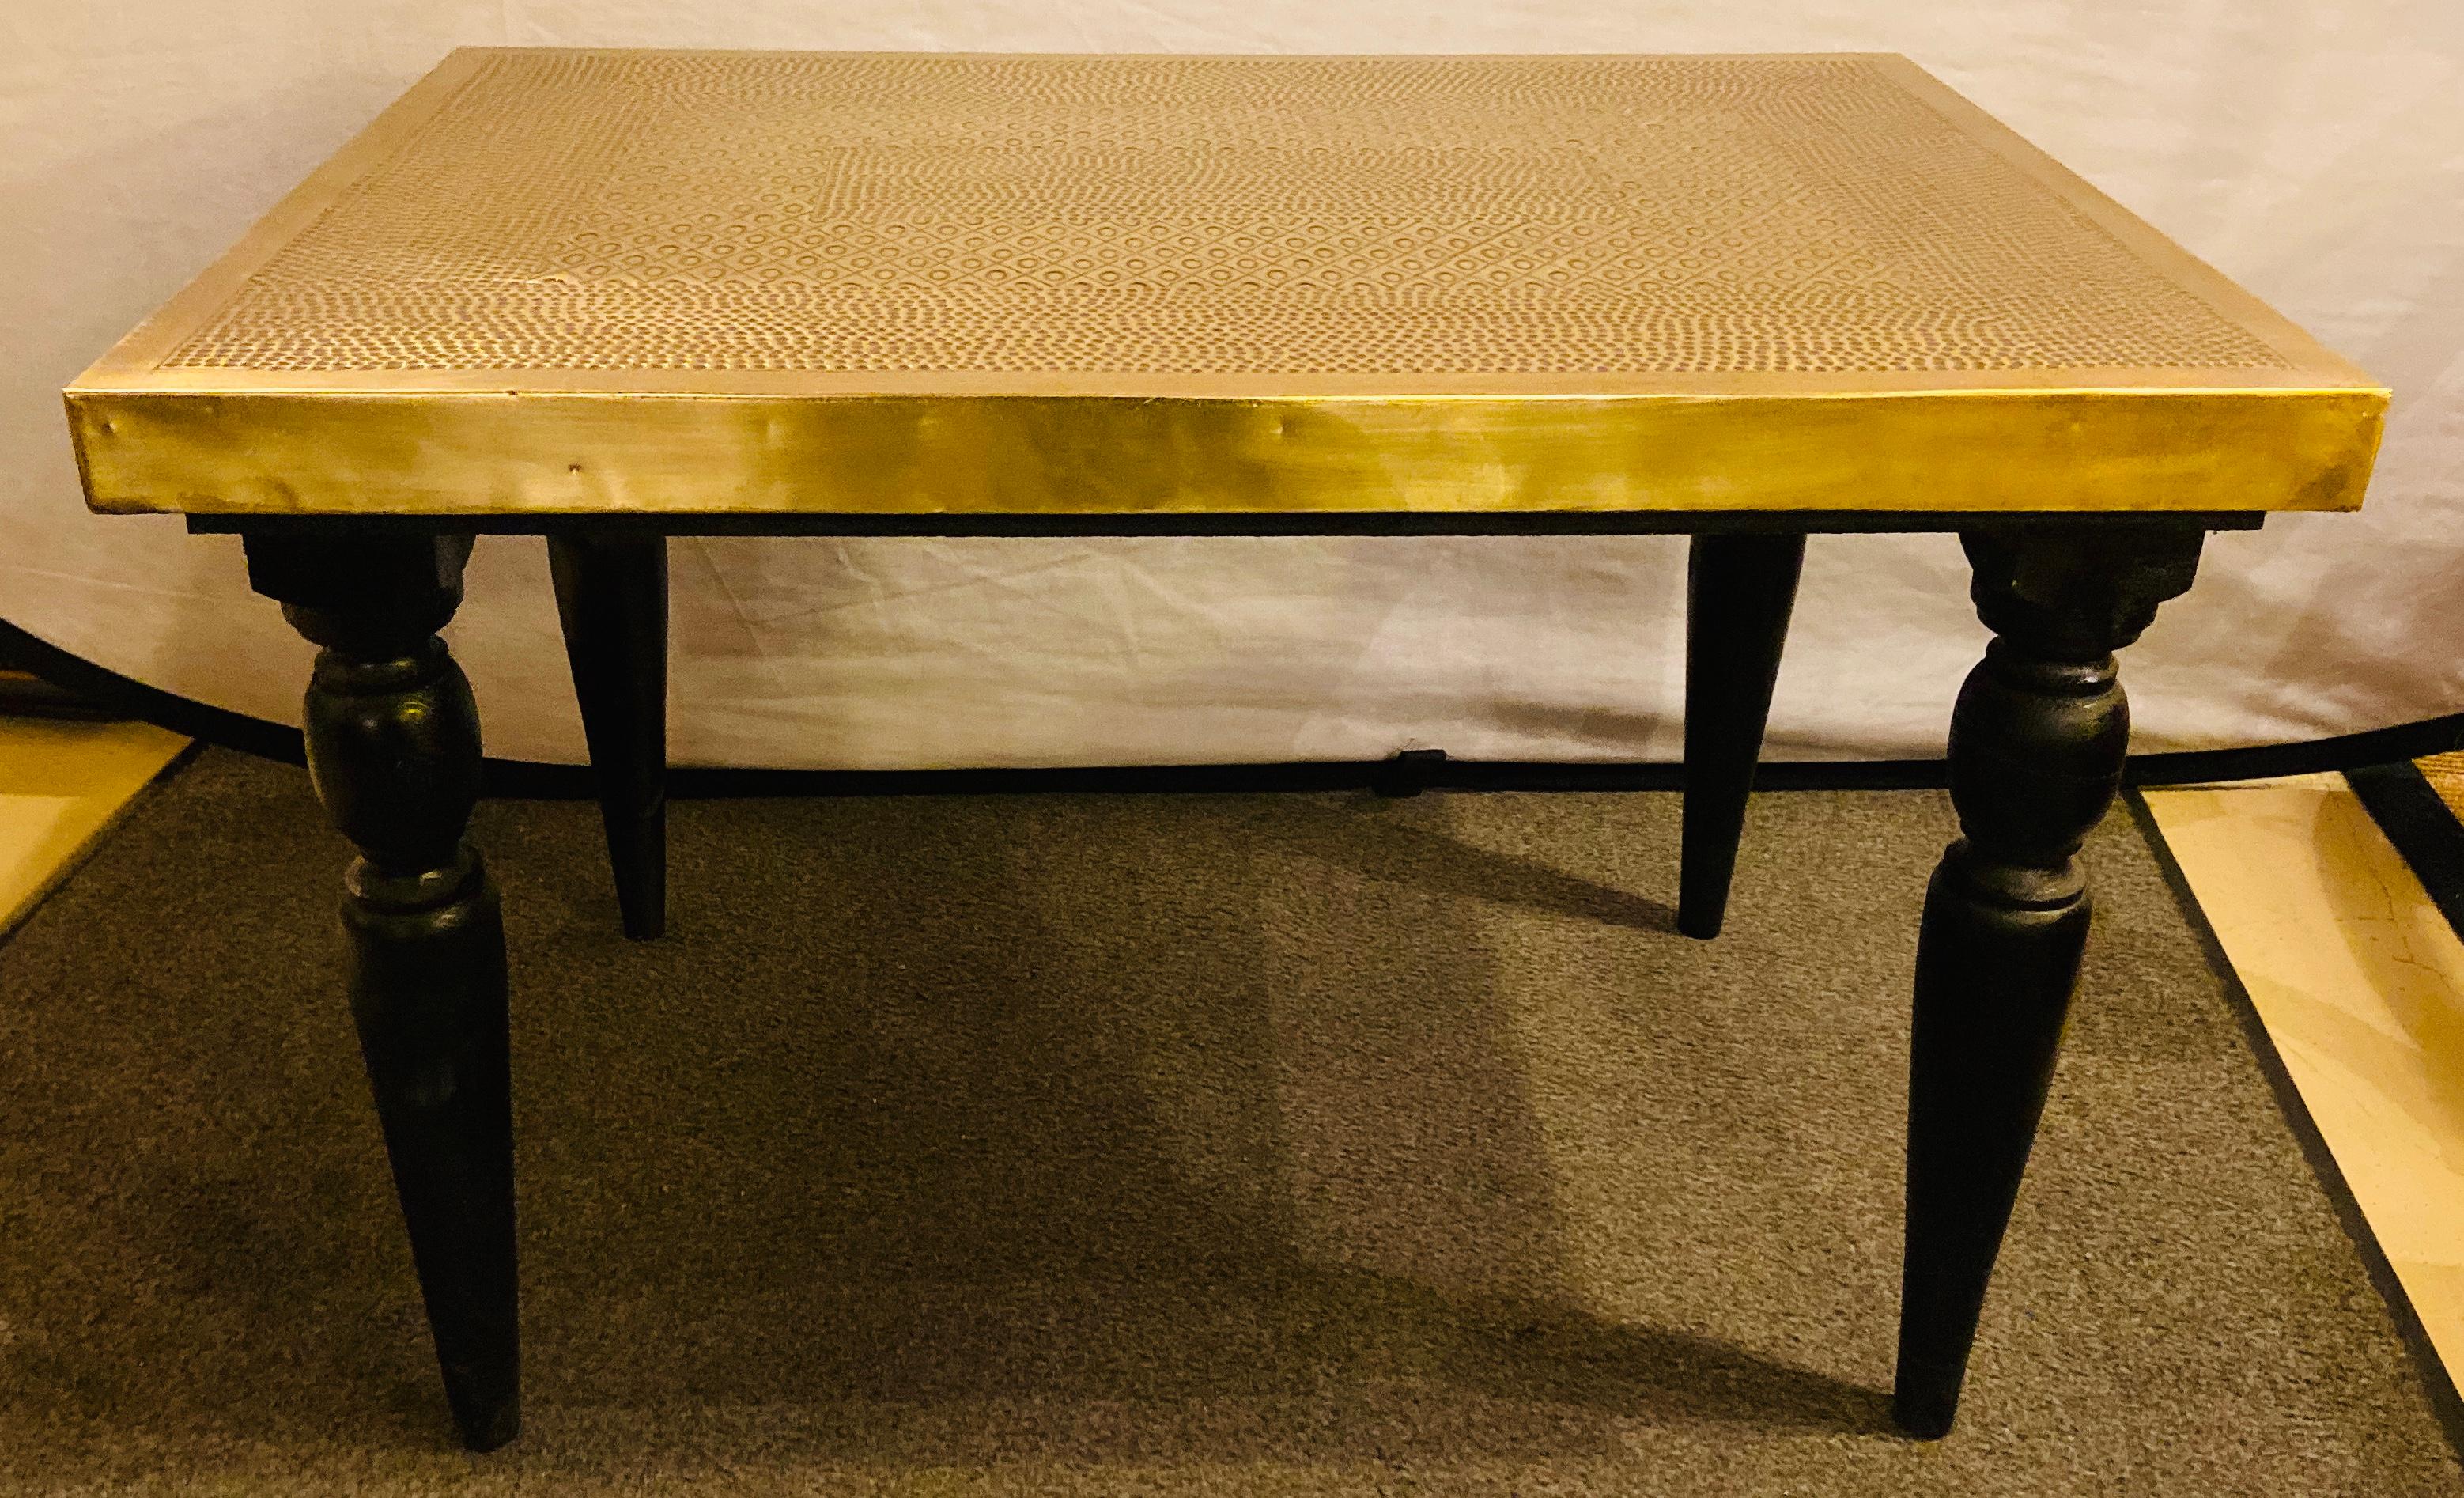 A pair of  Hollywood Regency style hand-crafted brass center or end tables. These tables exude a timeless charm, boasting sleek rectangular silhouettes adorned with fine hammered designs upon their lustrous gold brass tops. The allure extends